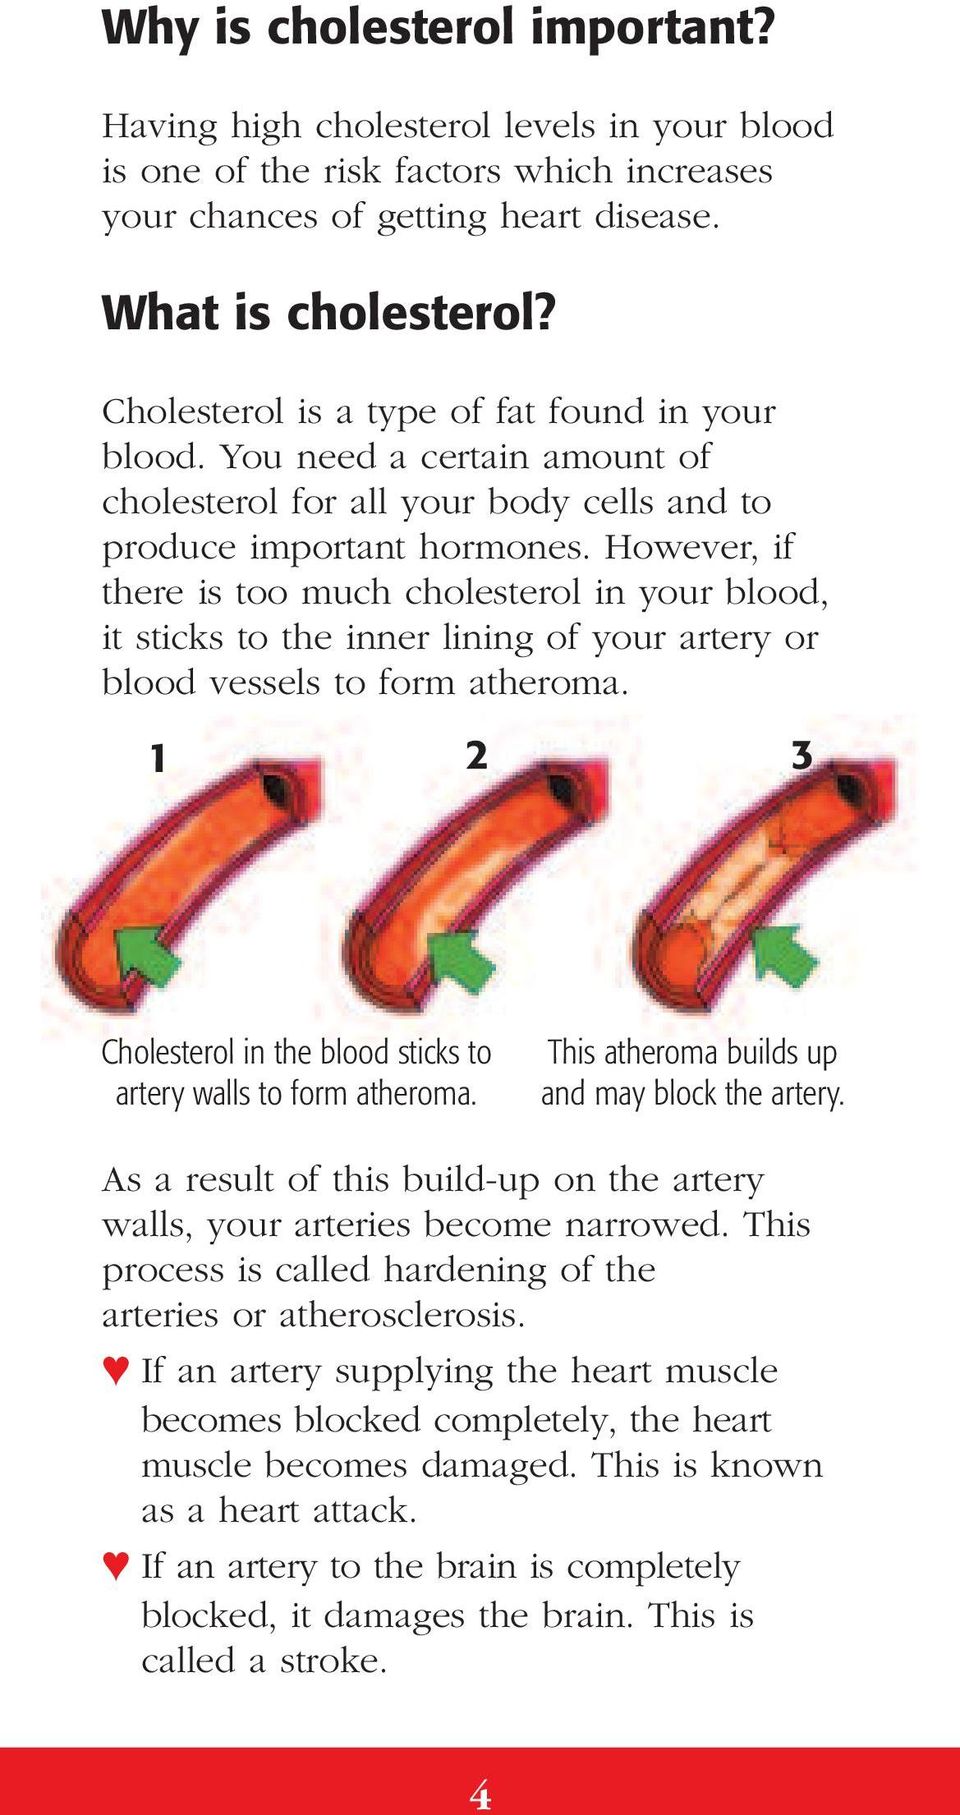 However, if there is too much cholesterol in your blood, it sticks to the inner lining of your artery or blood vessels to form atheroma.